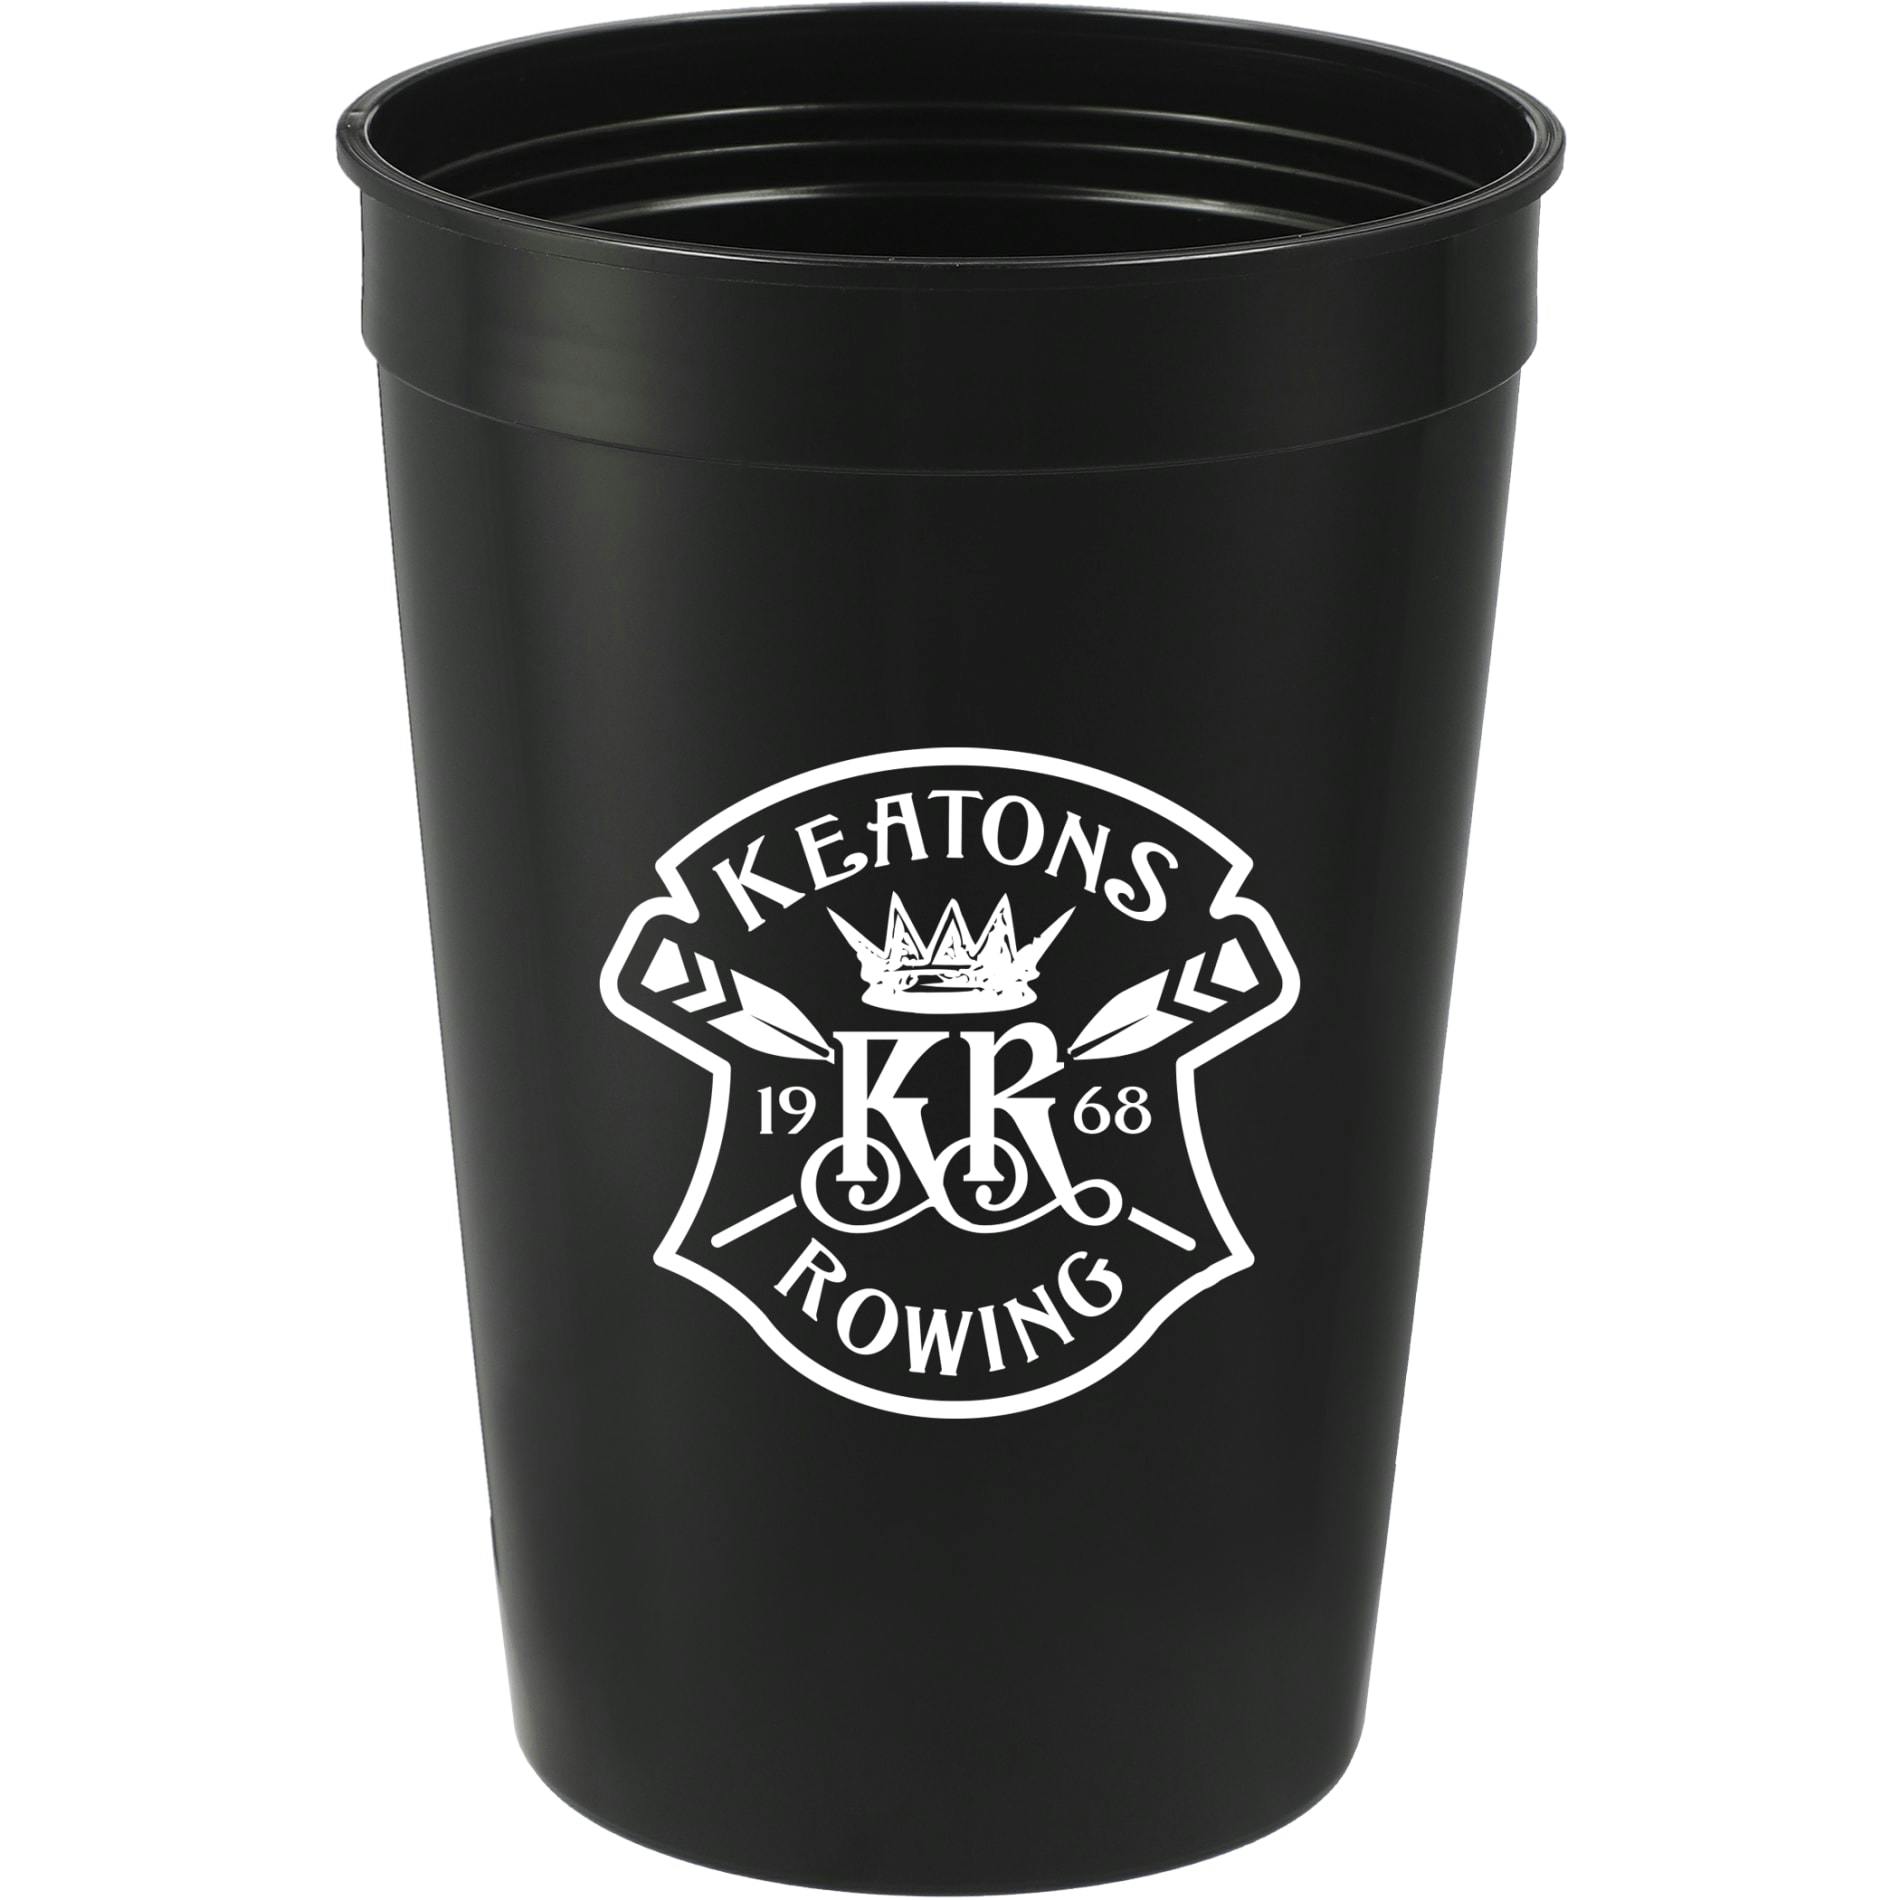 Solid 16oz Stadium Cup - additional Image 2